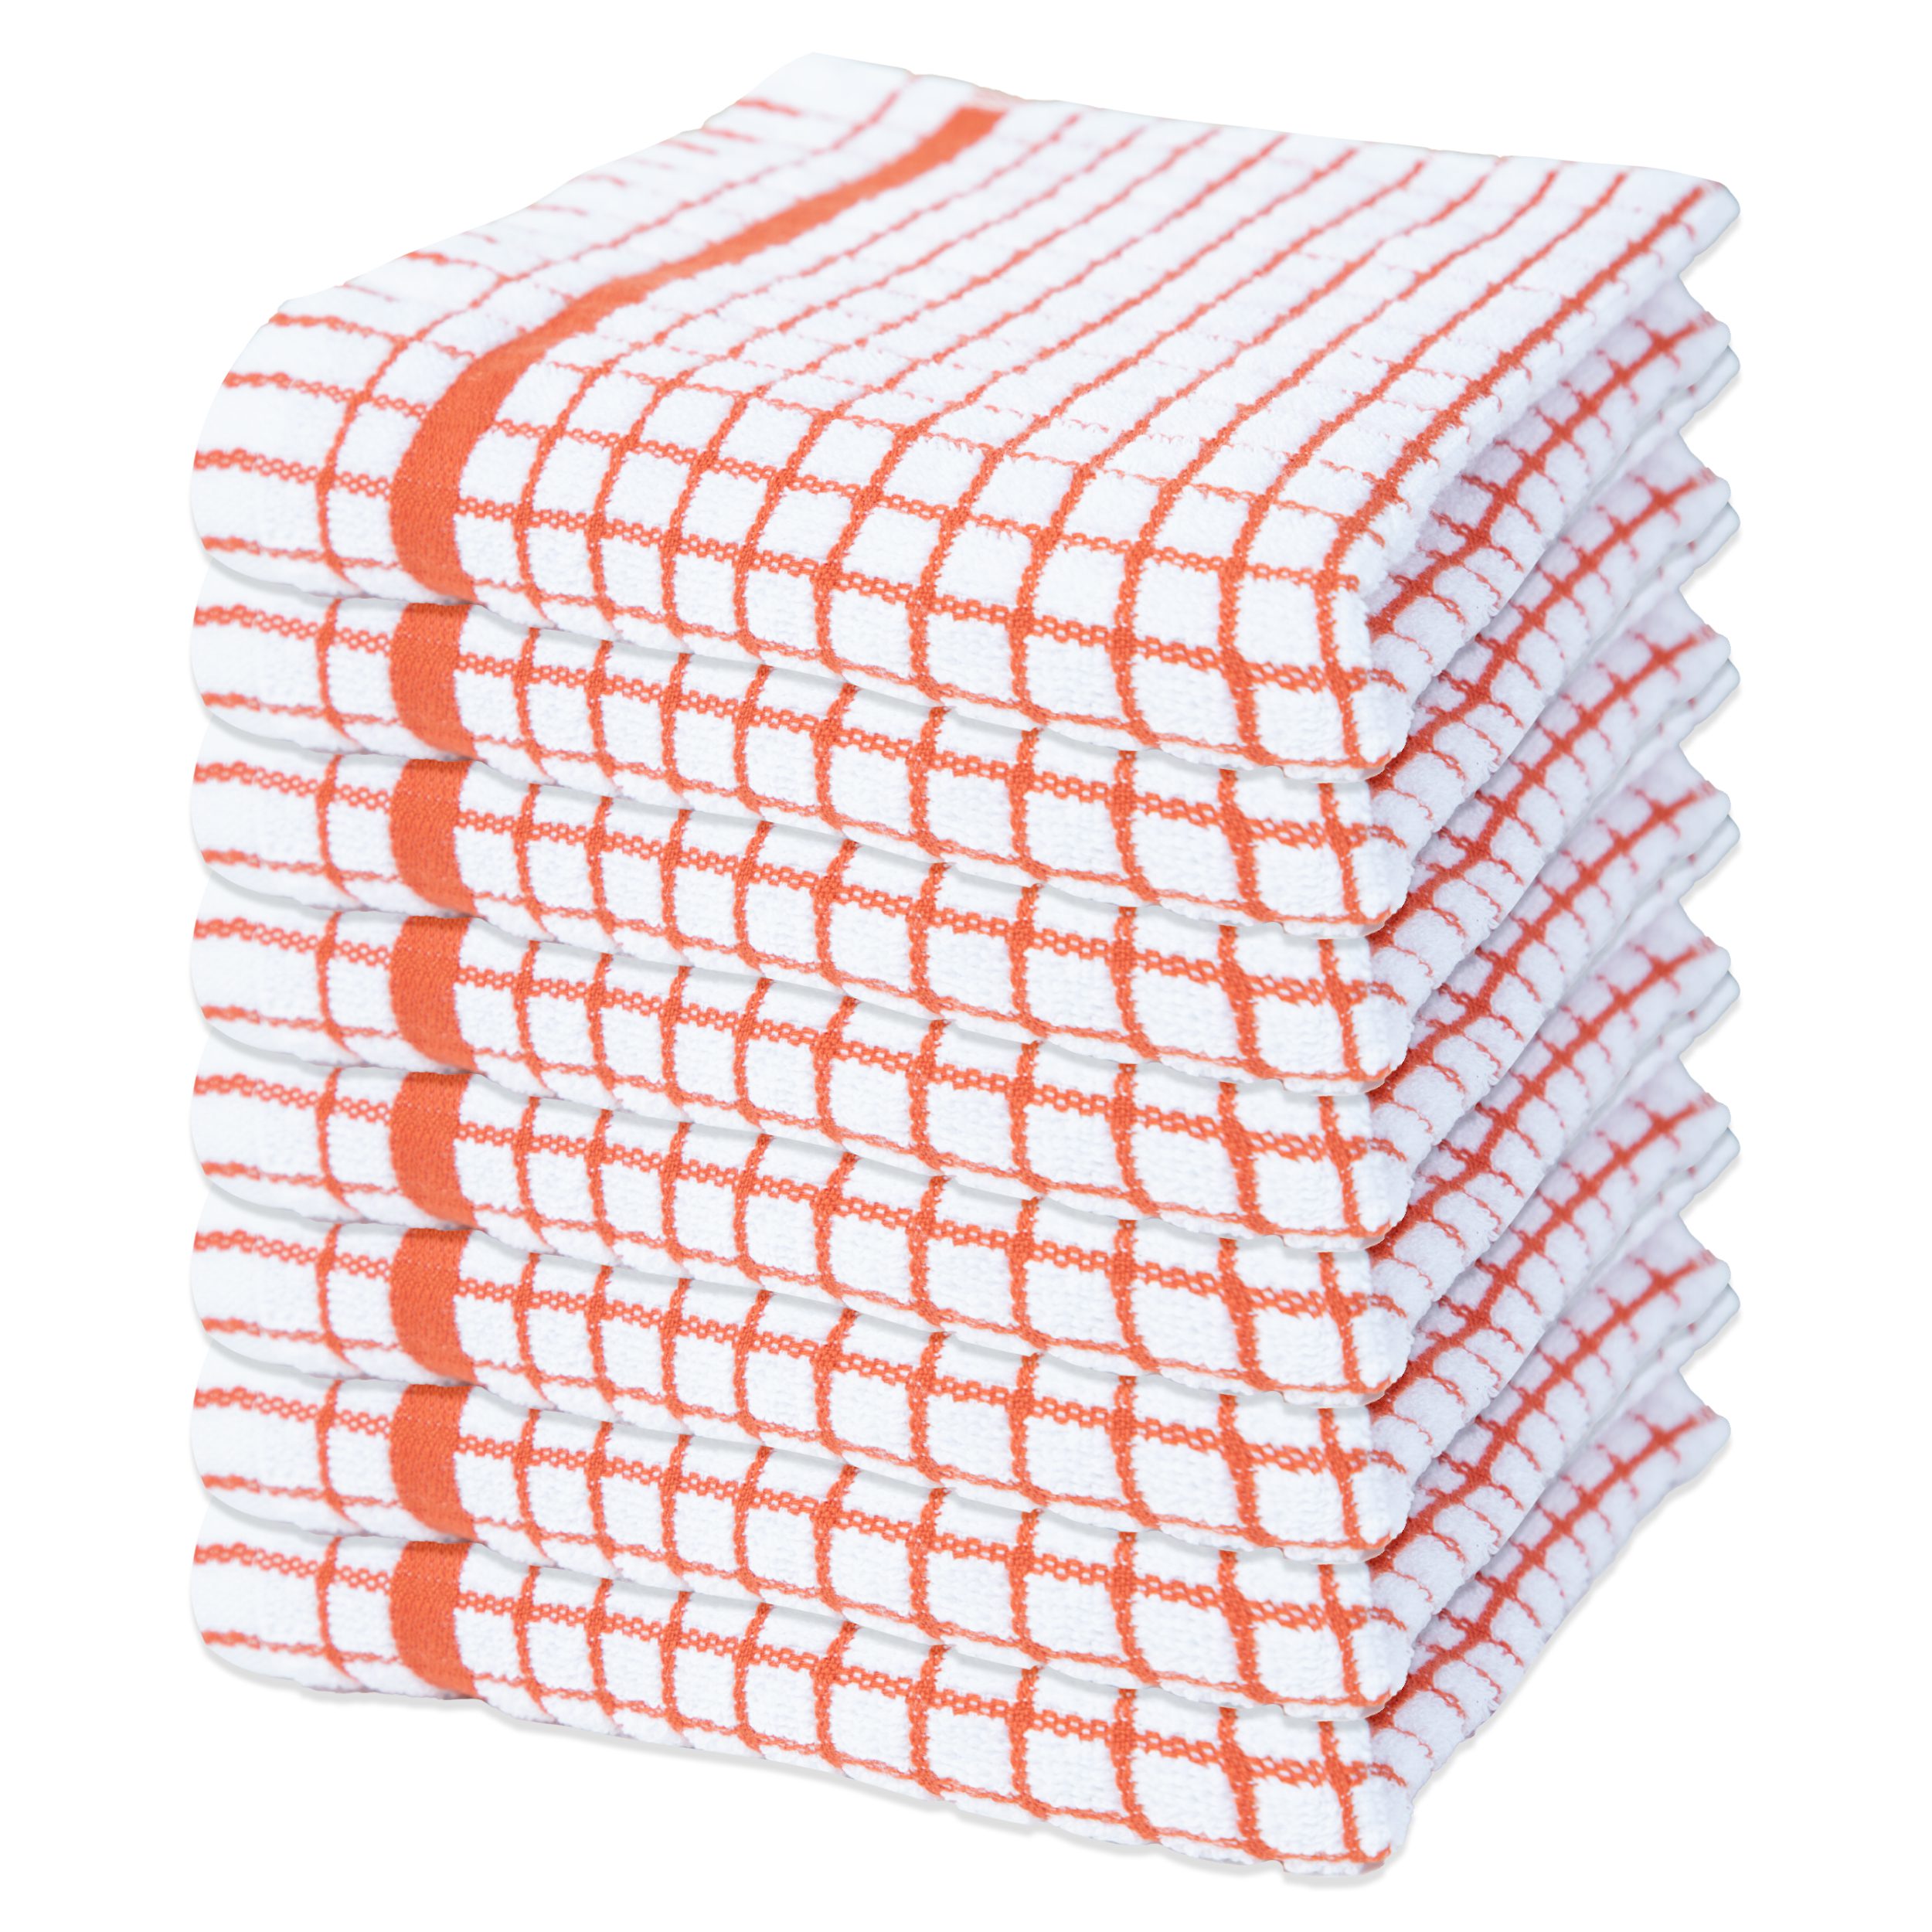 6-Pack Sloppy Chef Classic Check Kitchen Towels - Arkwright Home